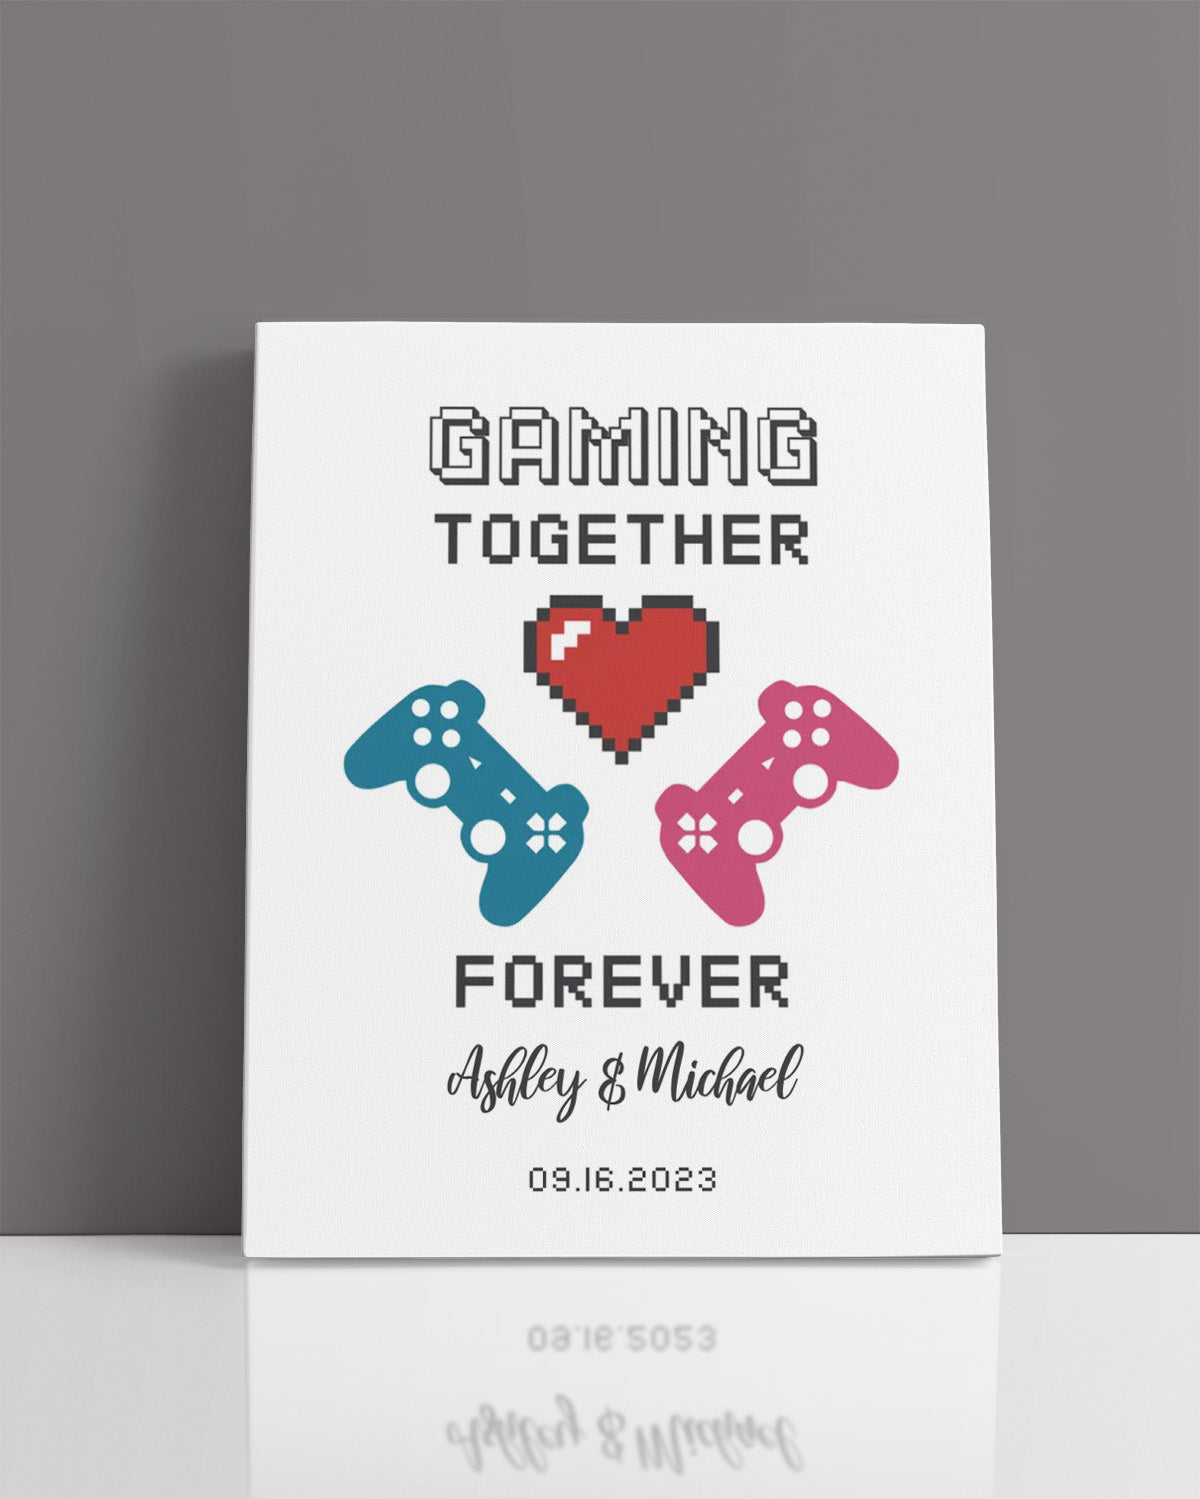 Gaming Together Forever - Customizable Wall Decor Canvas Art for gamers - Great gift for a wedding or anniversary